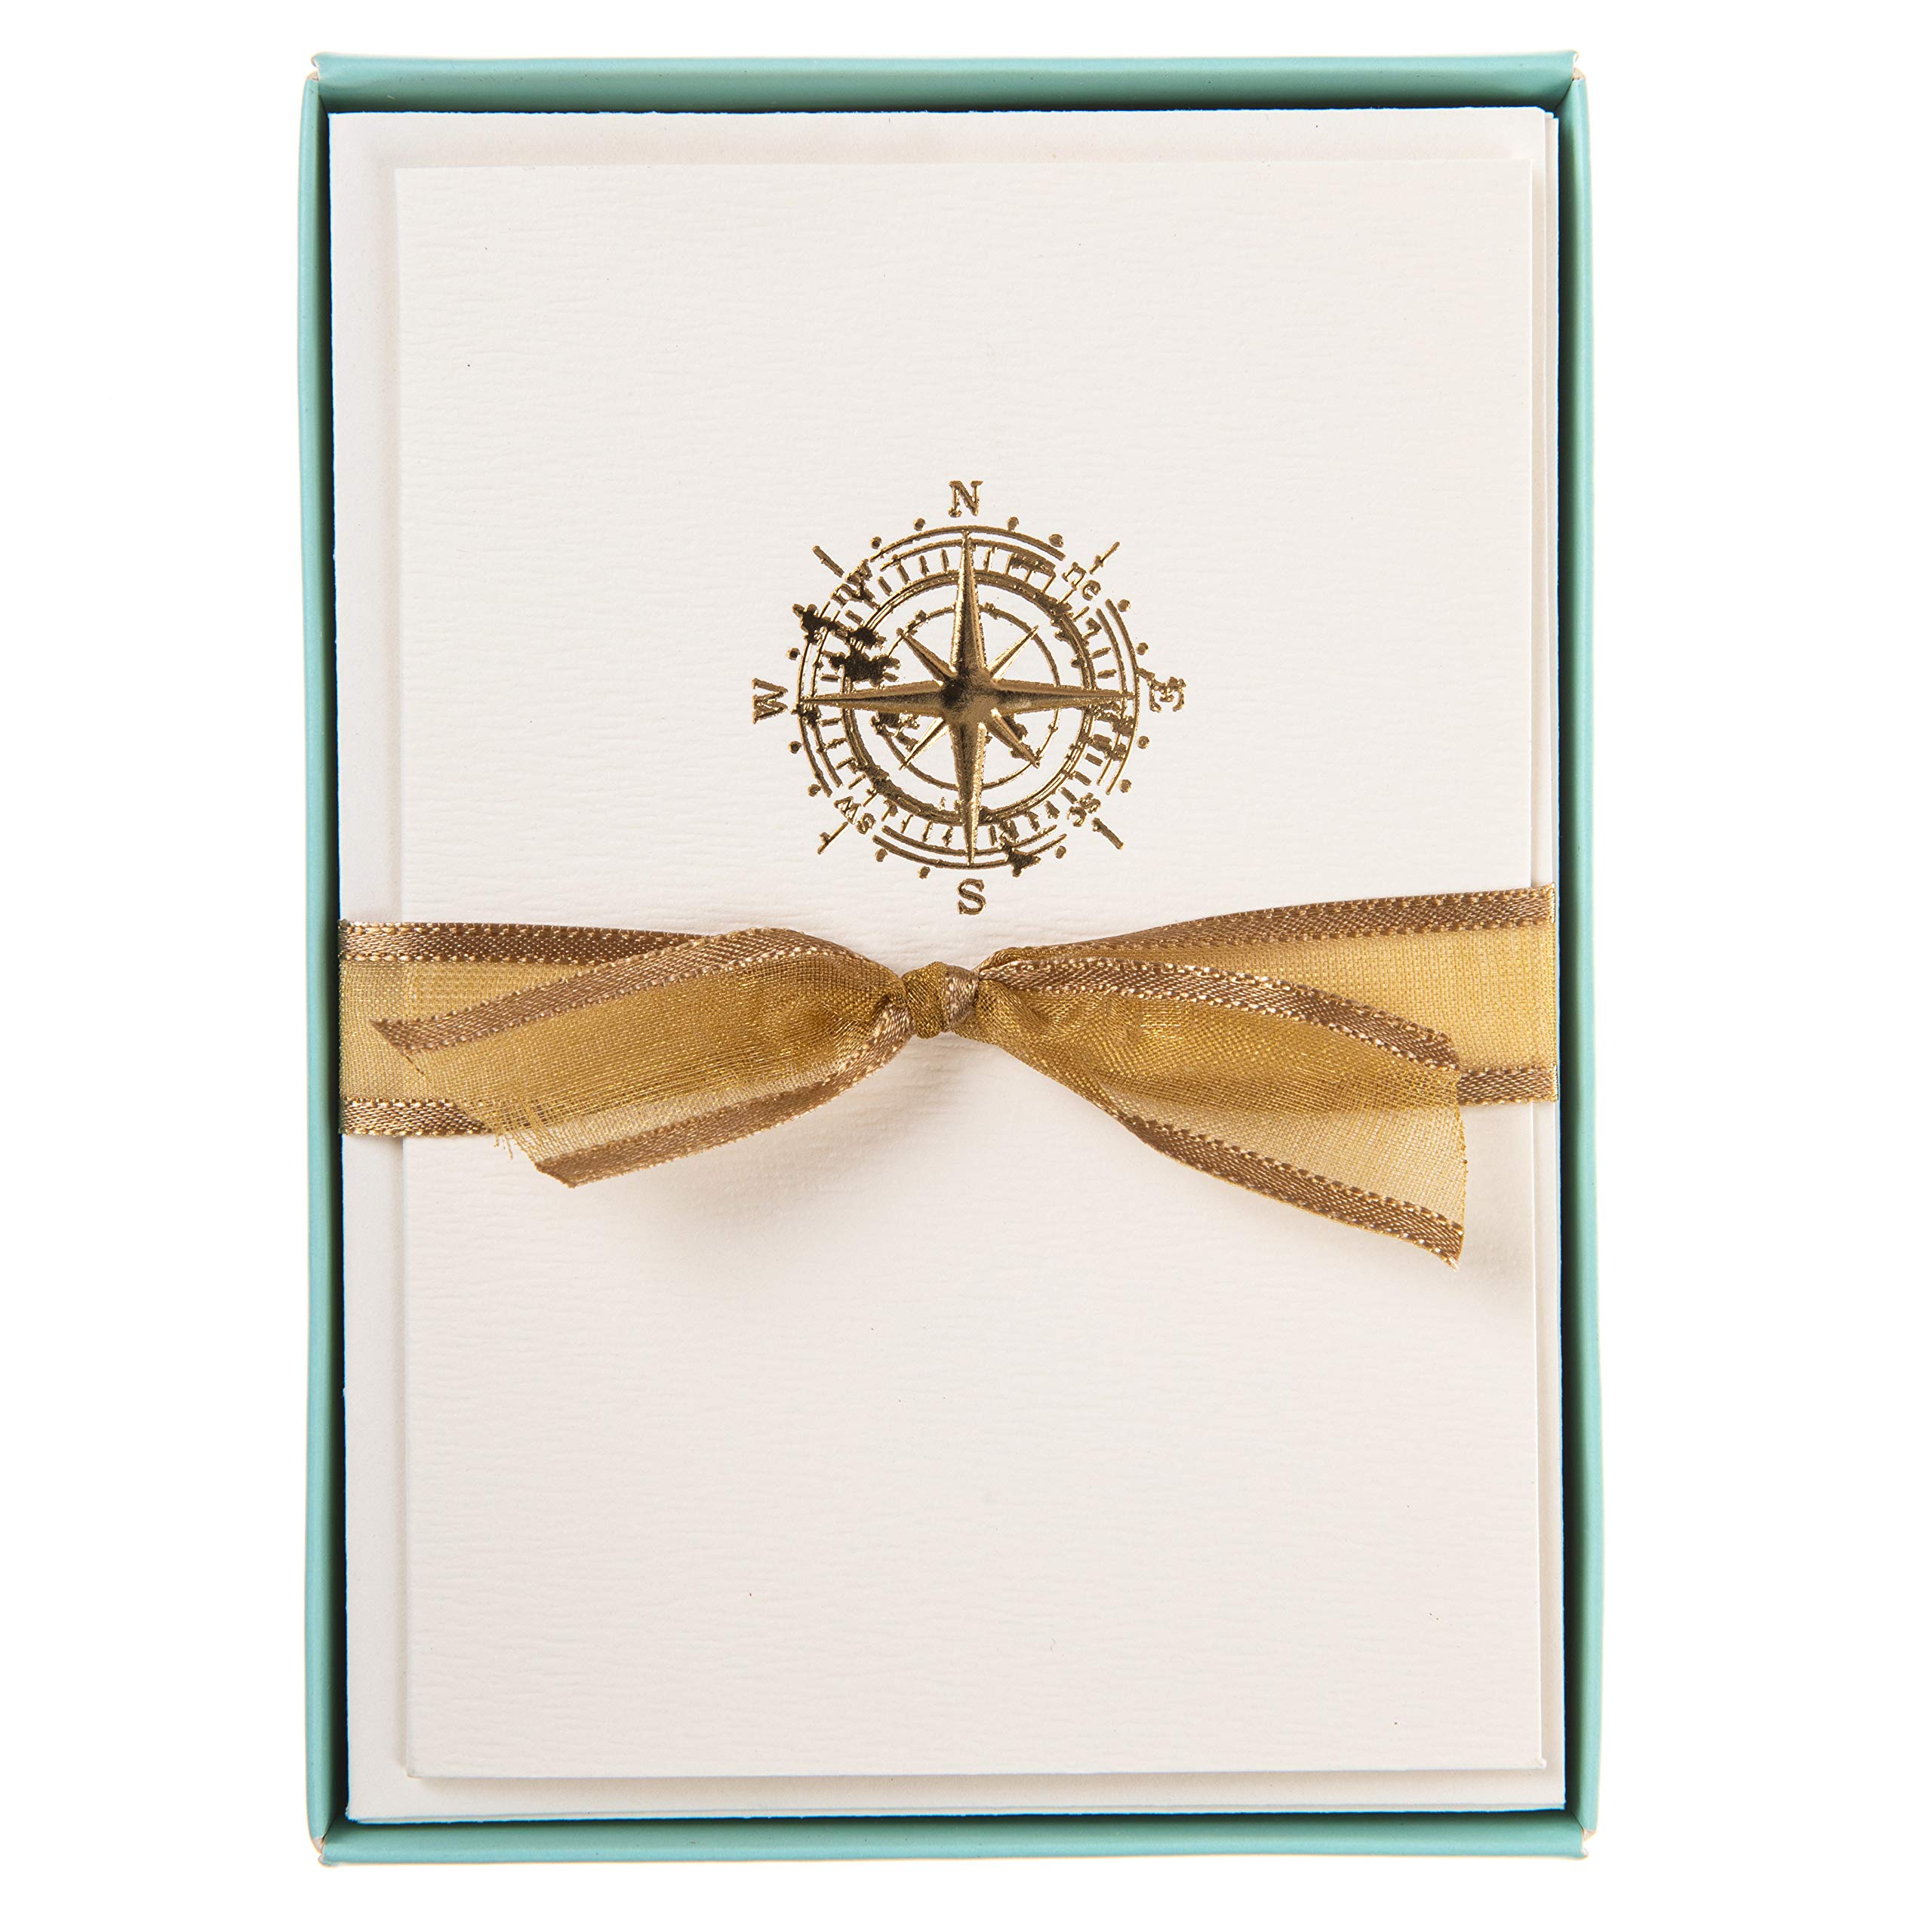 Graphique Nautical La Petite Presse Boxed Notecards - 10 Embossed and Embellished Gold Foil Compass Blank Cards with Matching Envelopes, 3.25